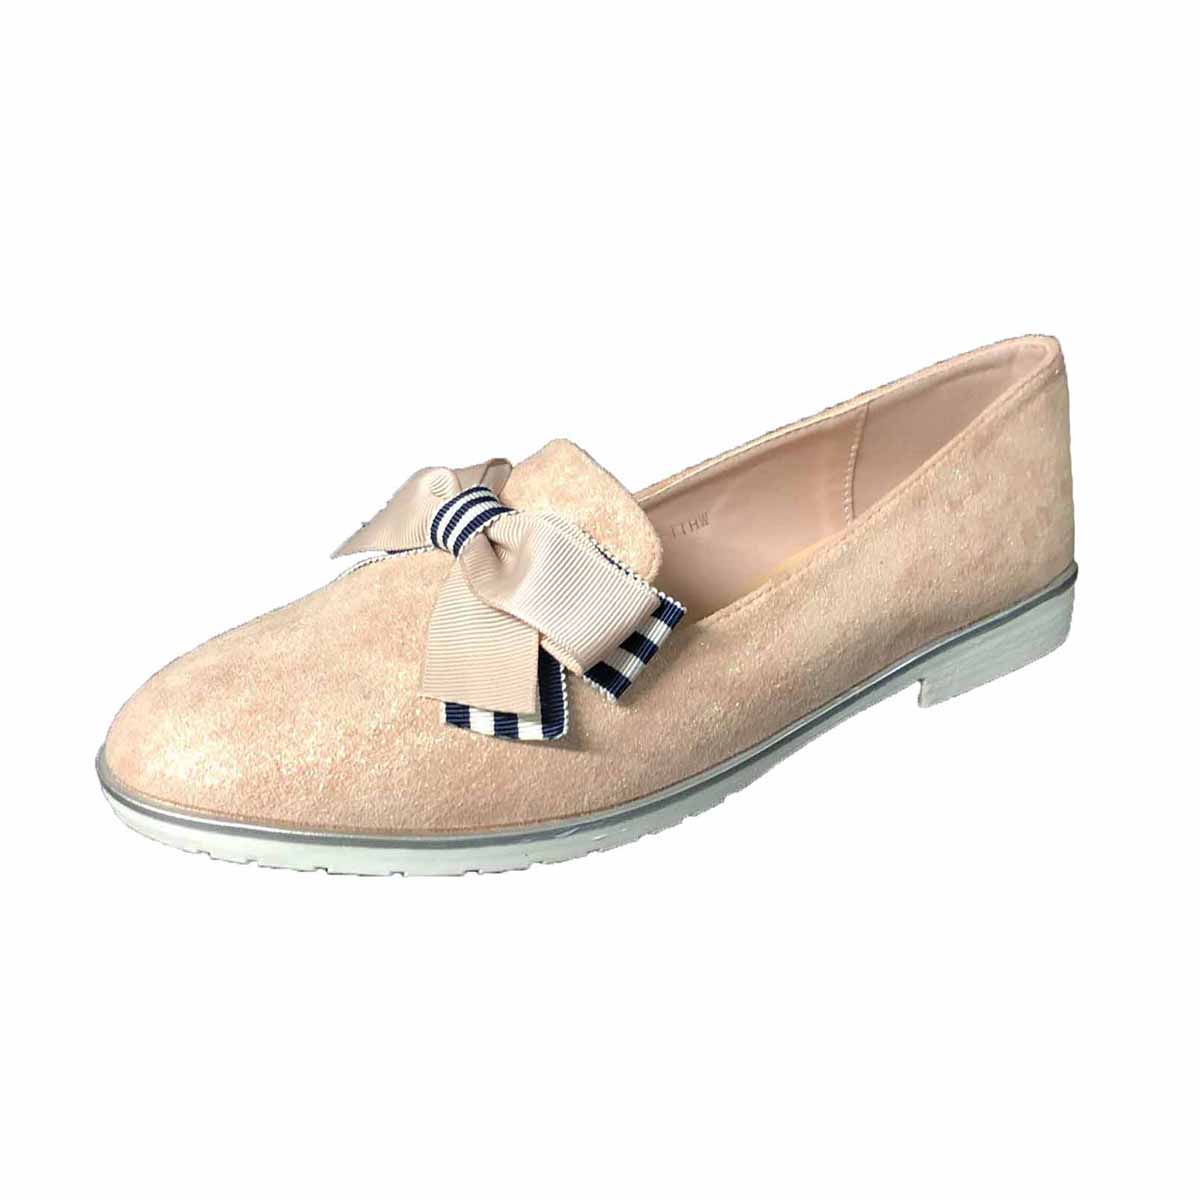 Flat loafer style shoes with bow detail